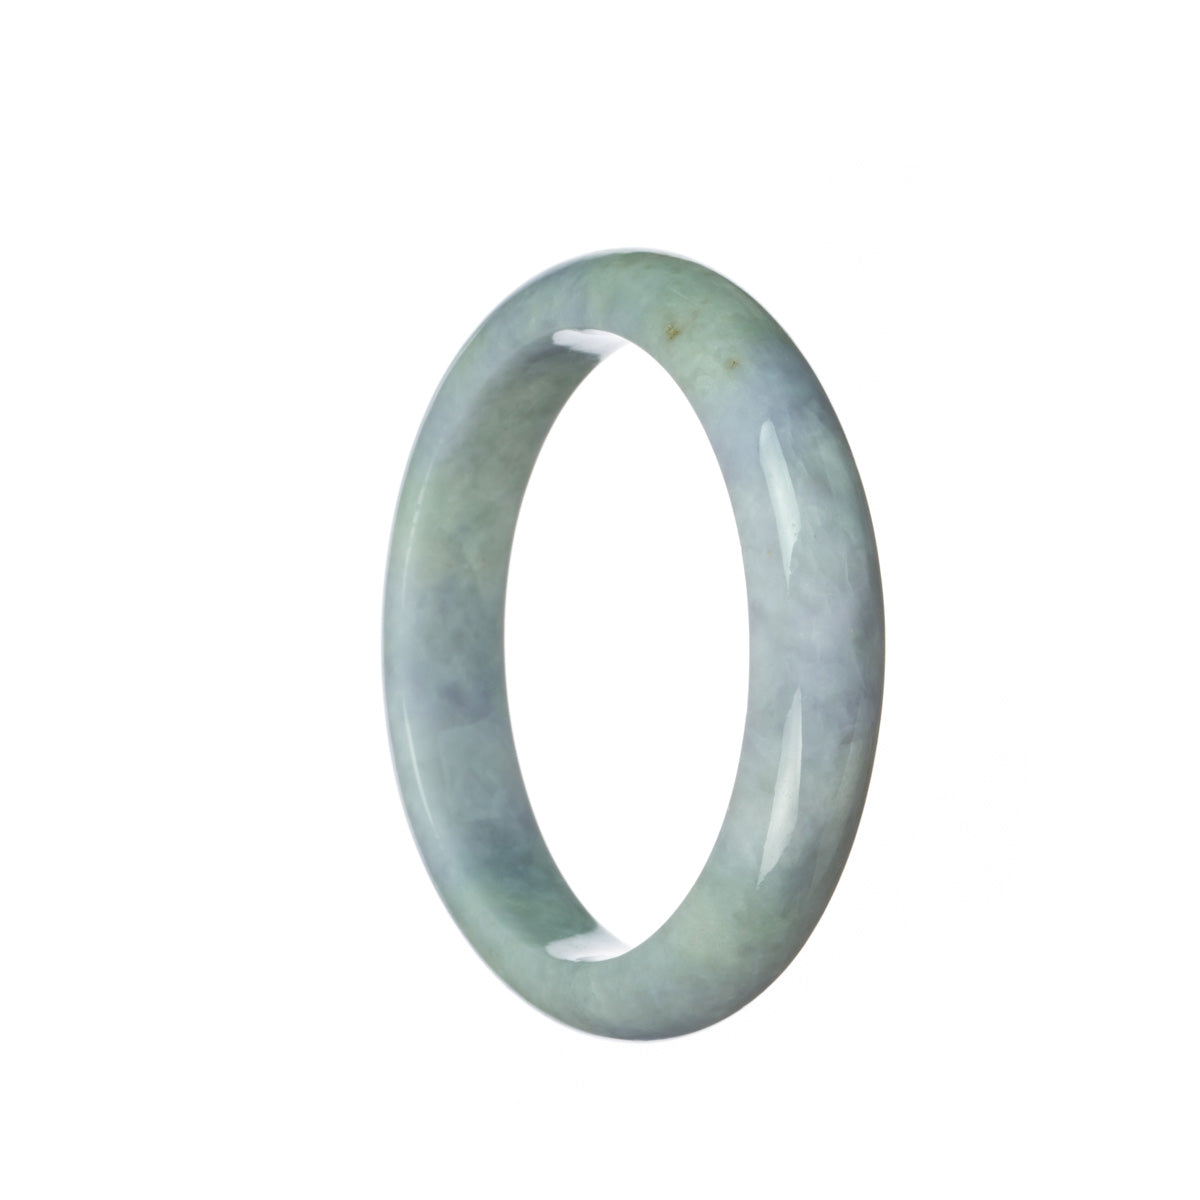 A beautiful lavender traditional jade bracelet with a semi-round shape, measuring 58mm. This genuine Type A jade bracelet from MAYS™ is a stunning accessory.